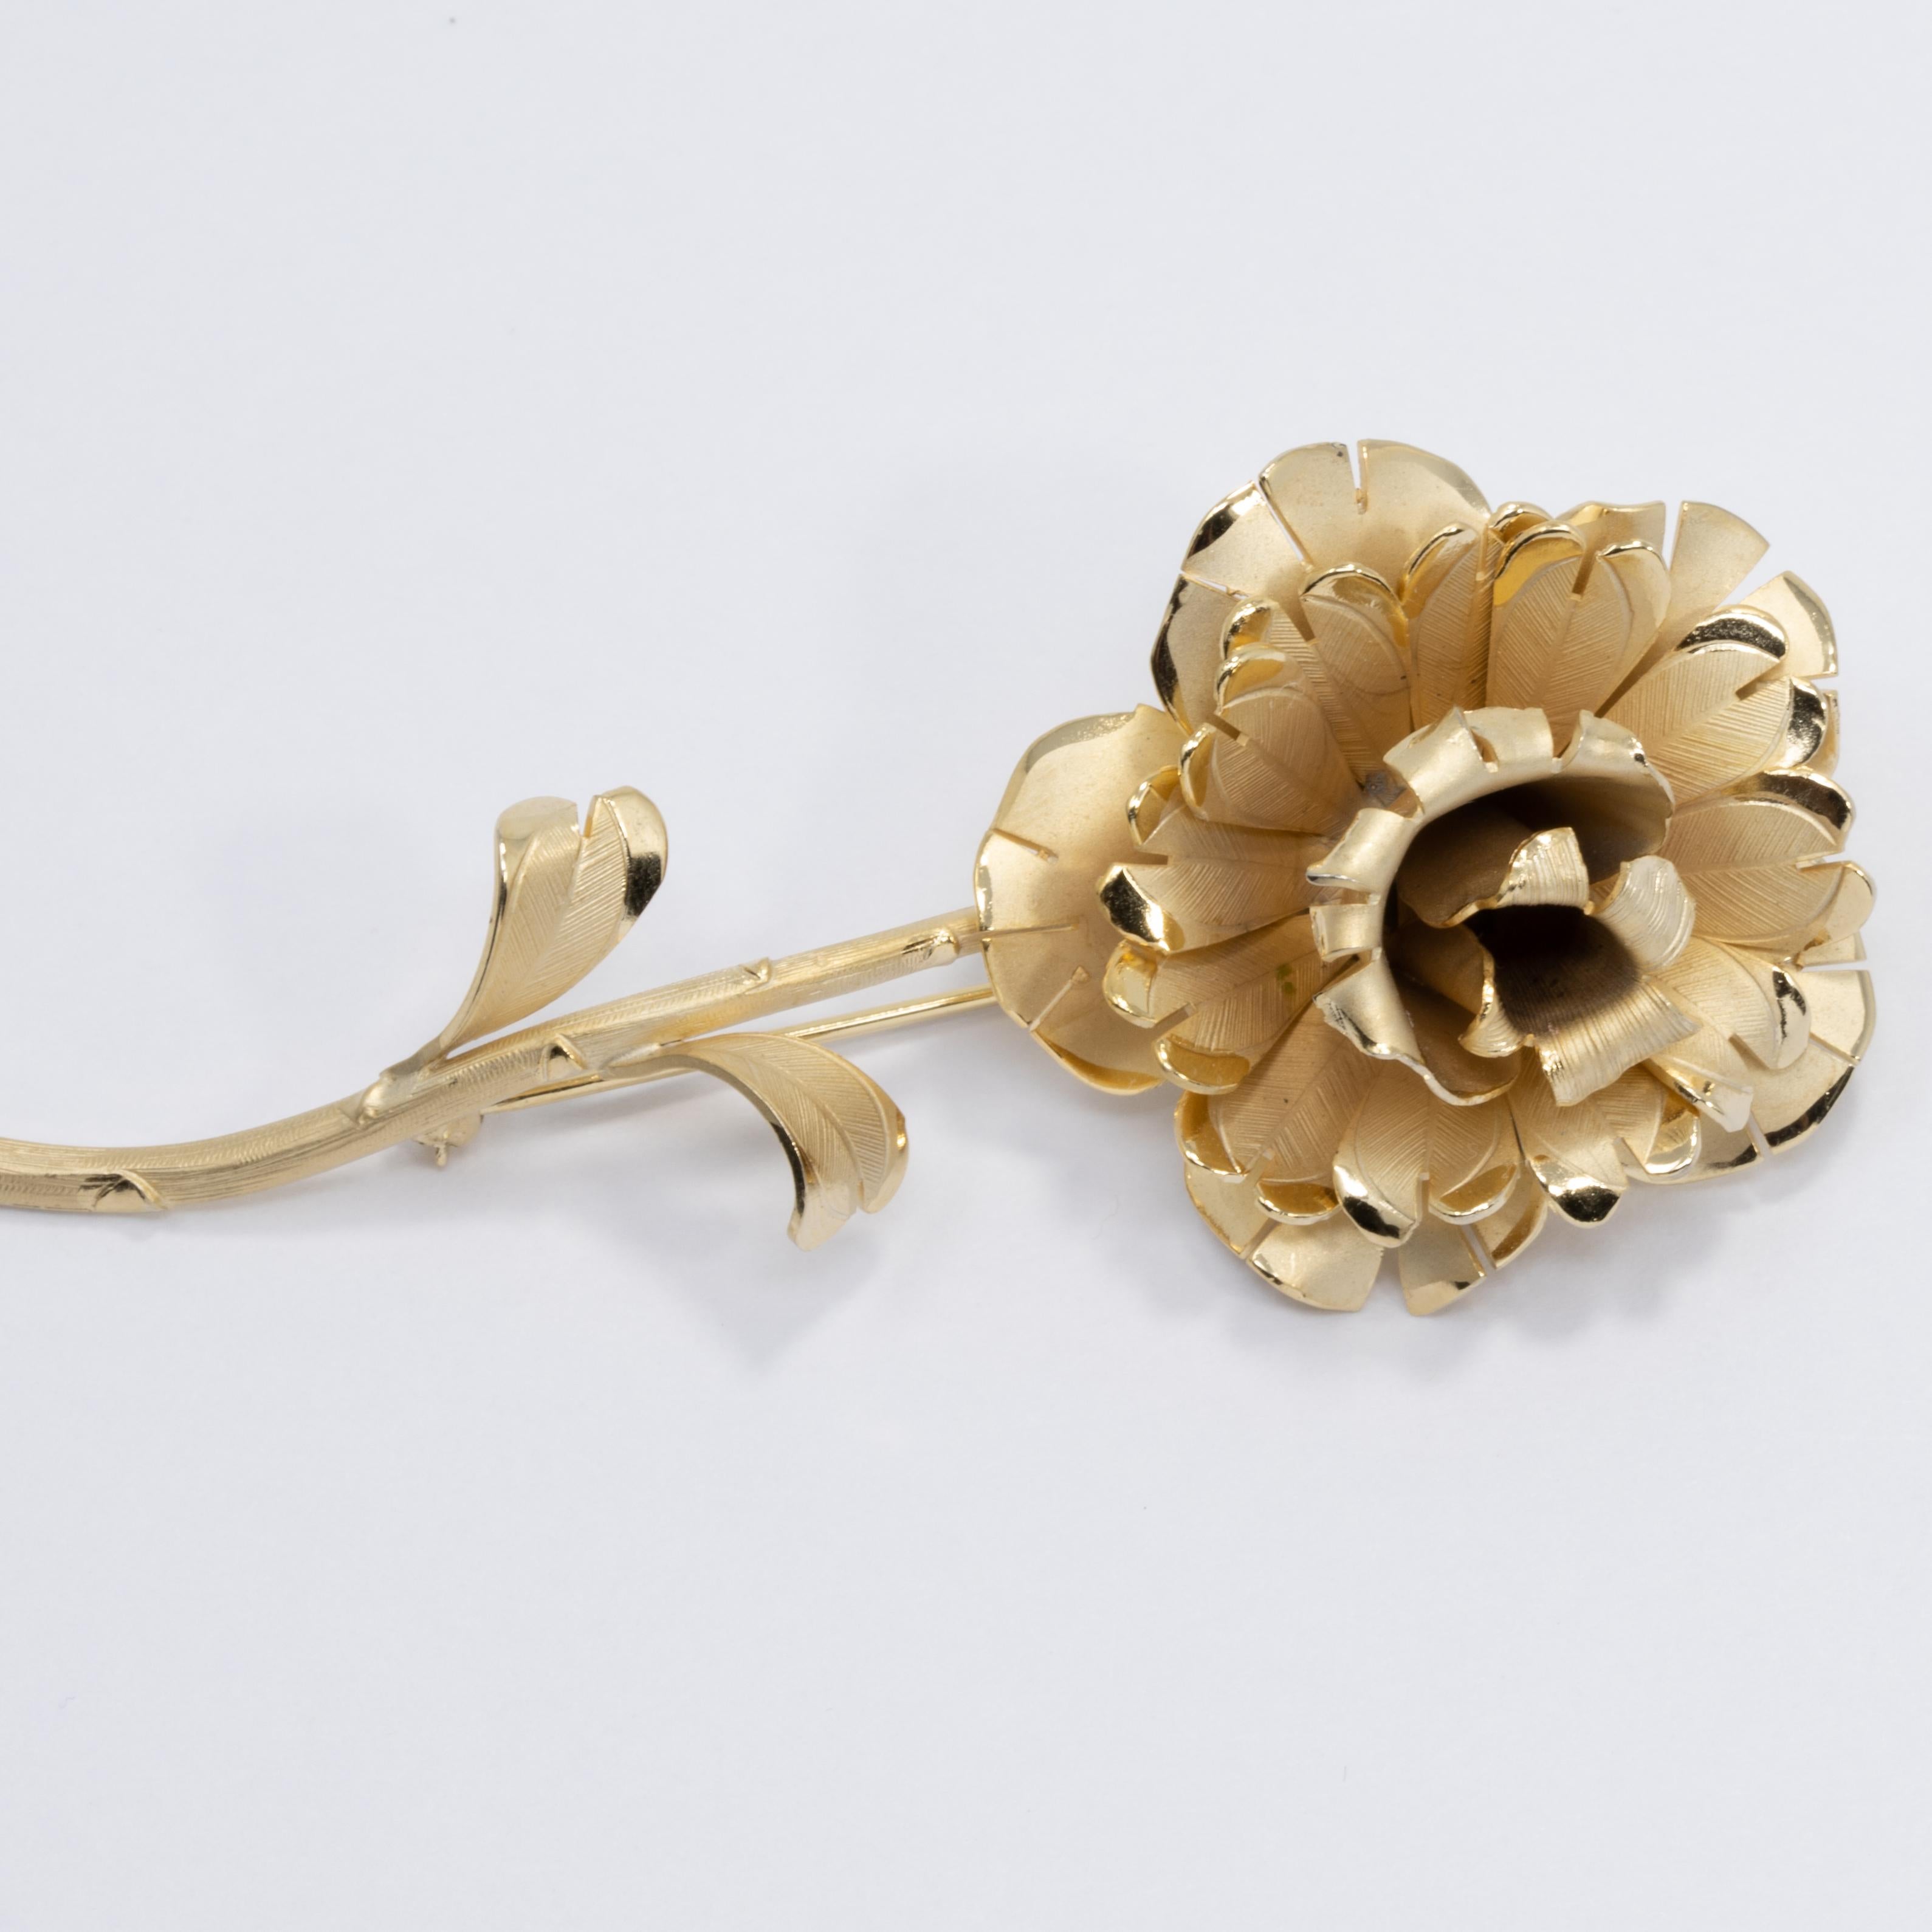 A sophisticated gold-tone pin brooch by Primex.  It's the little details on the stem and flowers in this pin that bring it to life!

Hallmarks: Primex